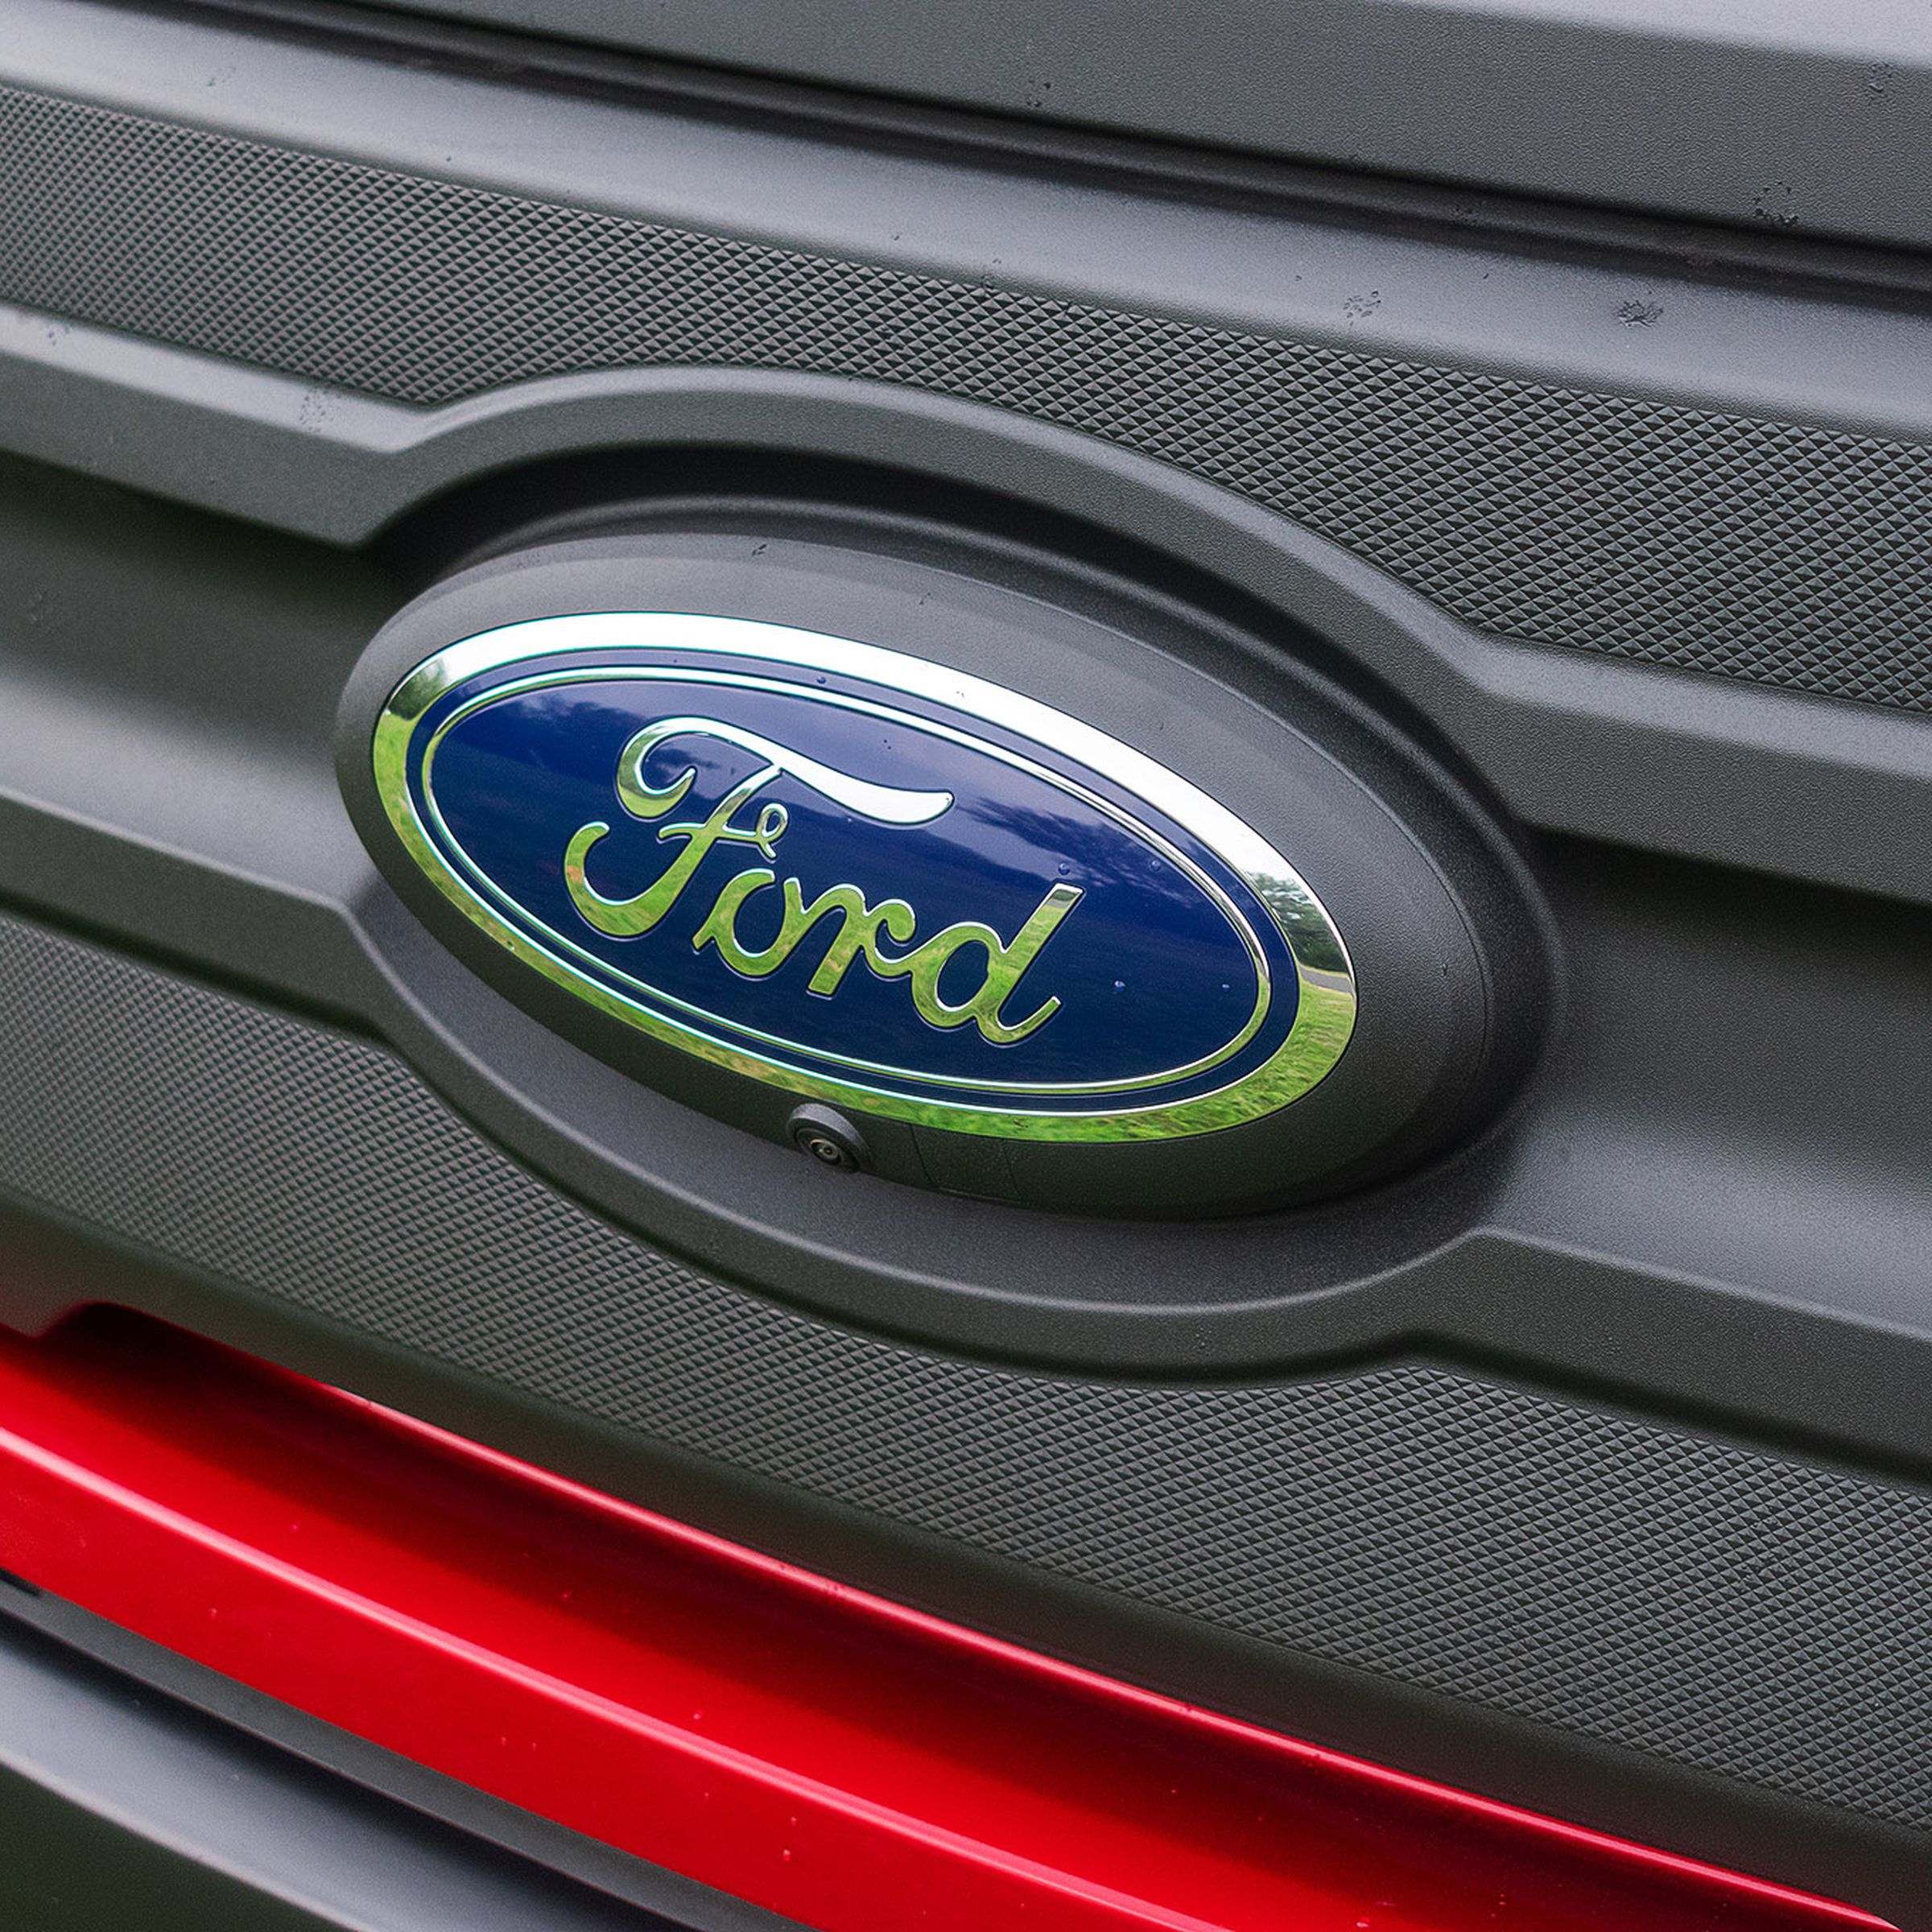 Ford logo on the front of an F-150 Lightning